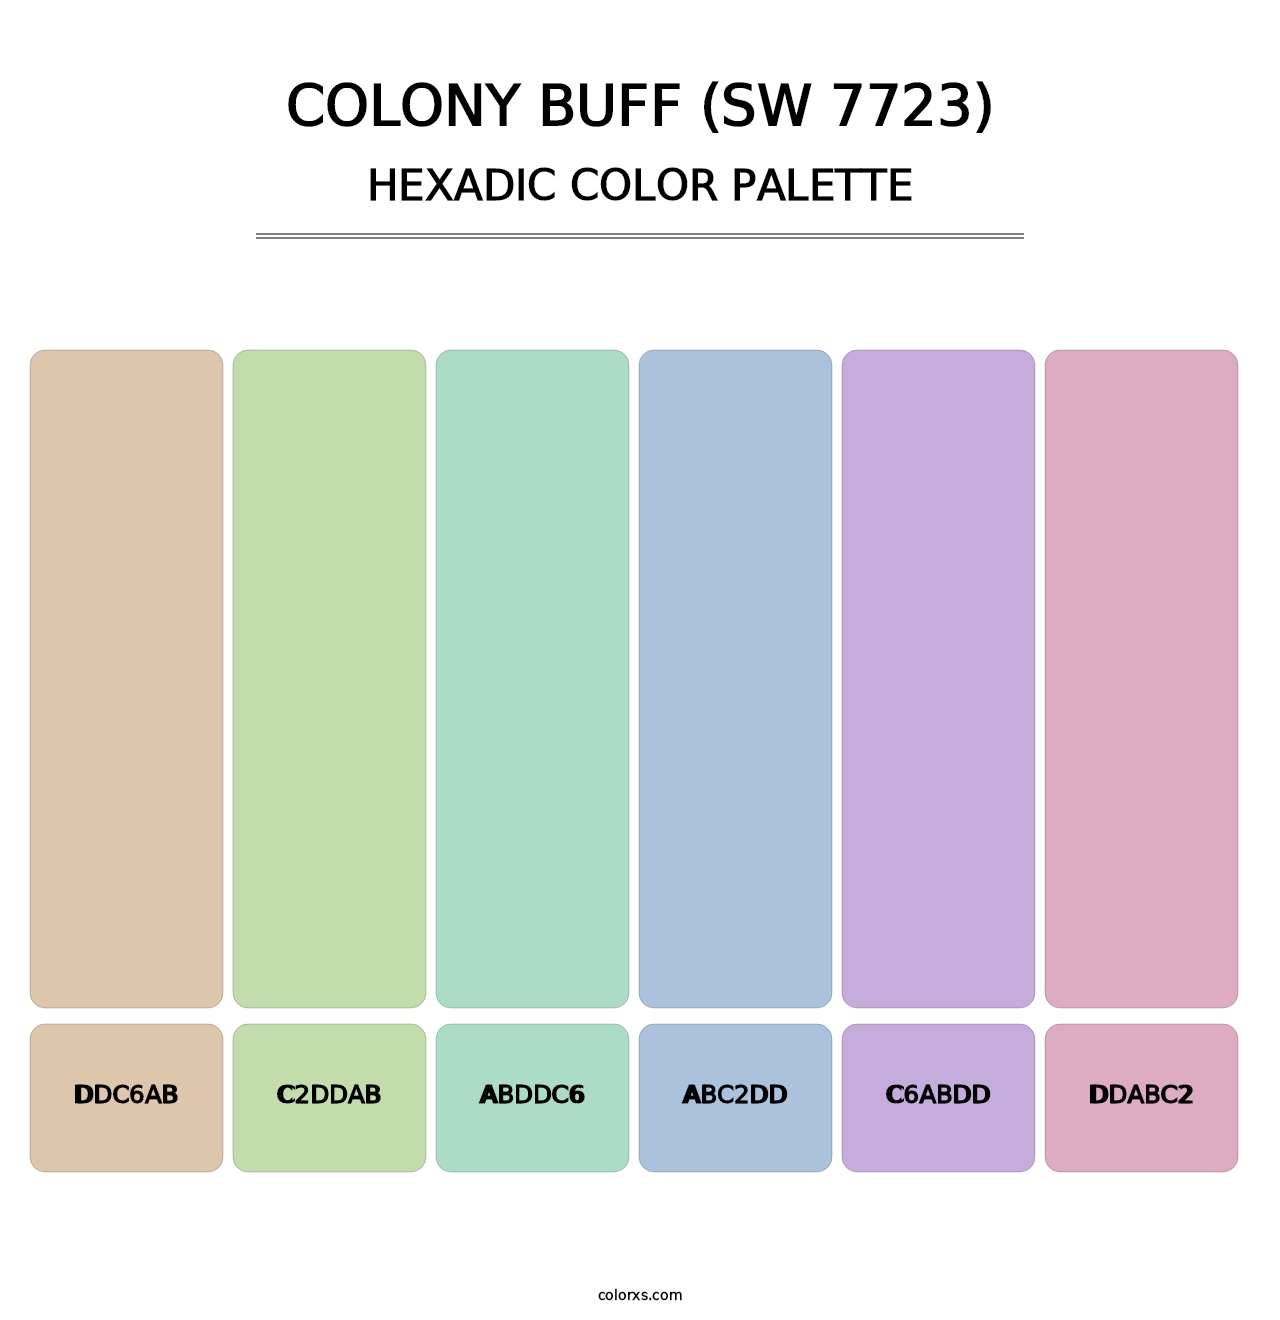 Colony Buff (SW 7723) - Hexadic Color Palette